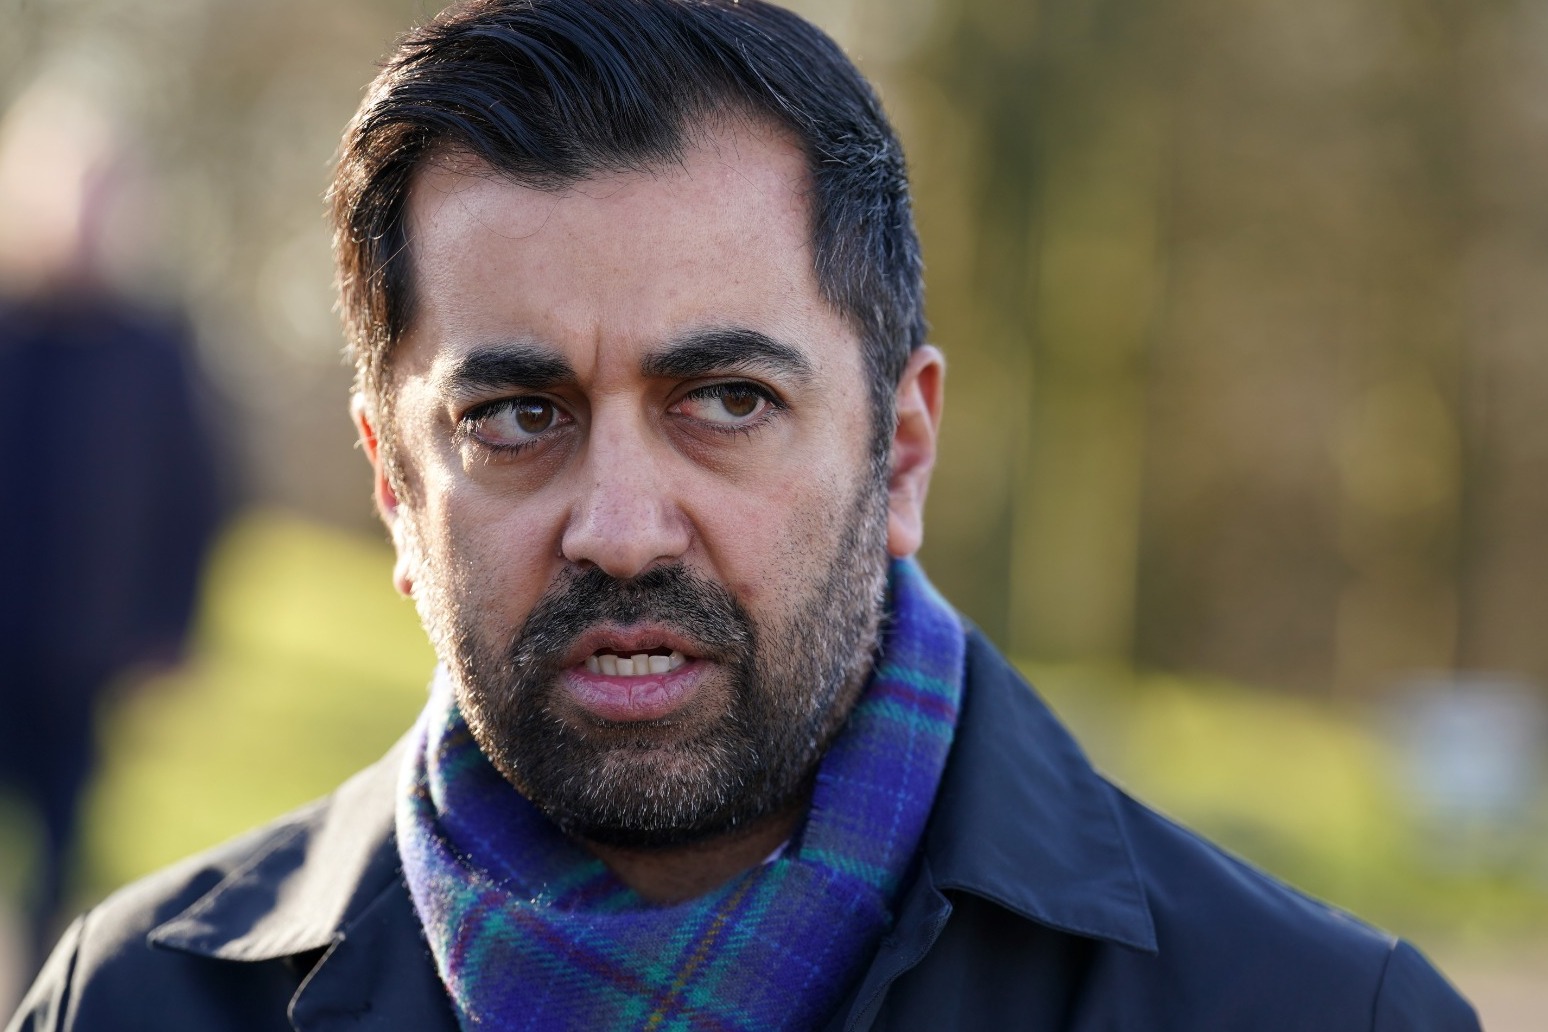 Yousaf committed to making Scotland better place